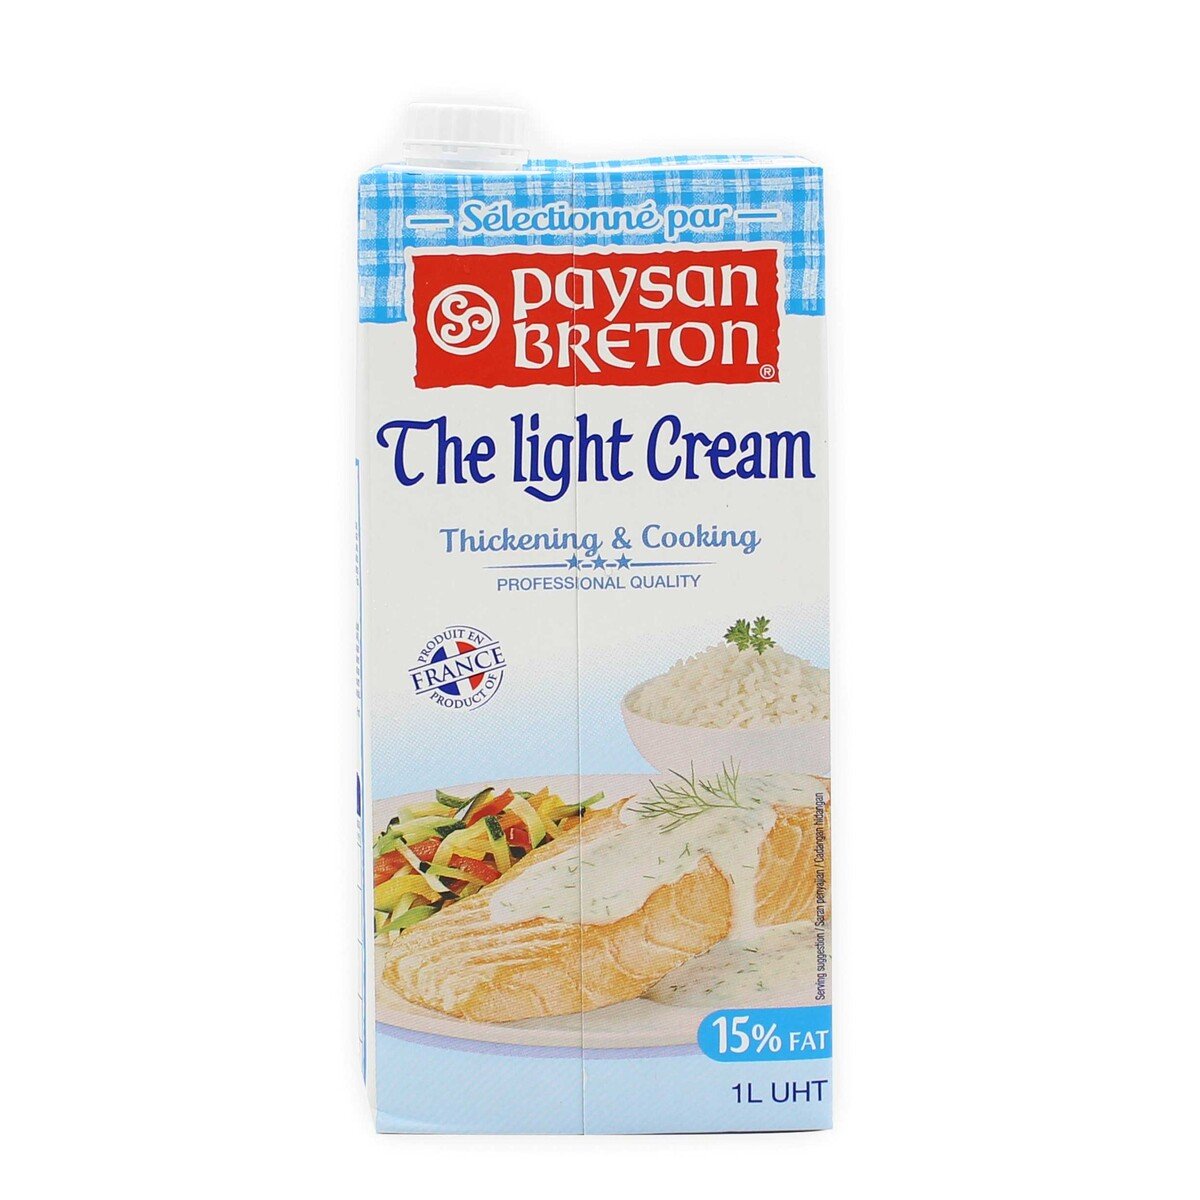 Paysan Breton The Light Cream Thickening & Cooking 15% Fat 1 Litre